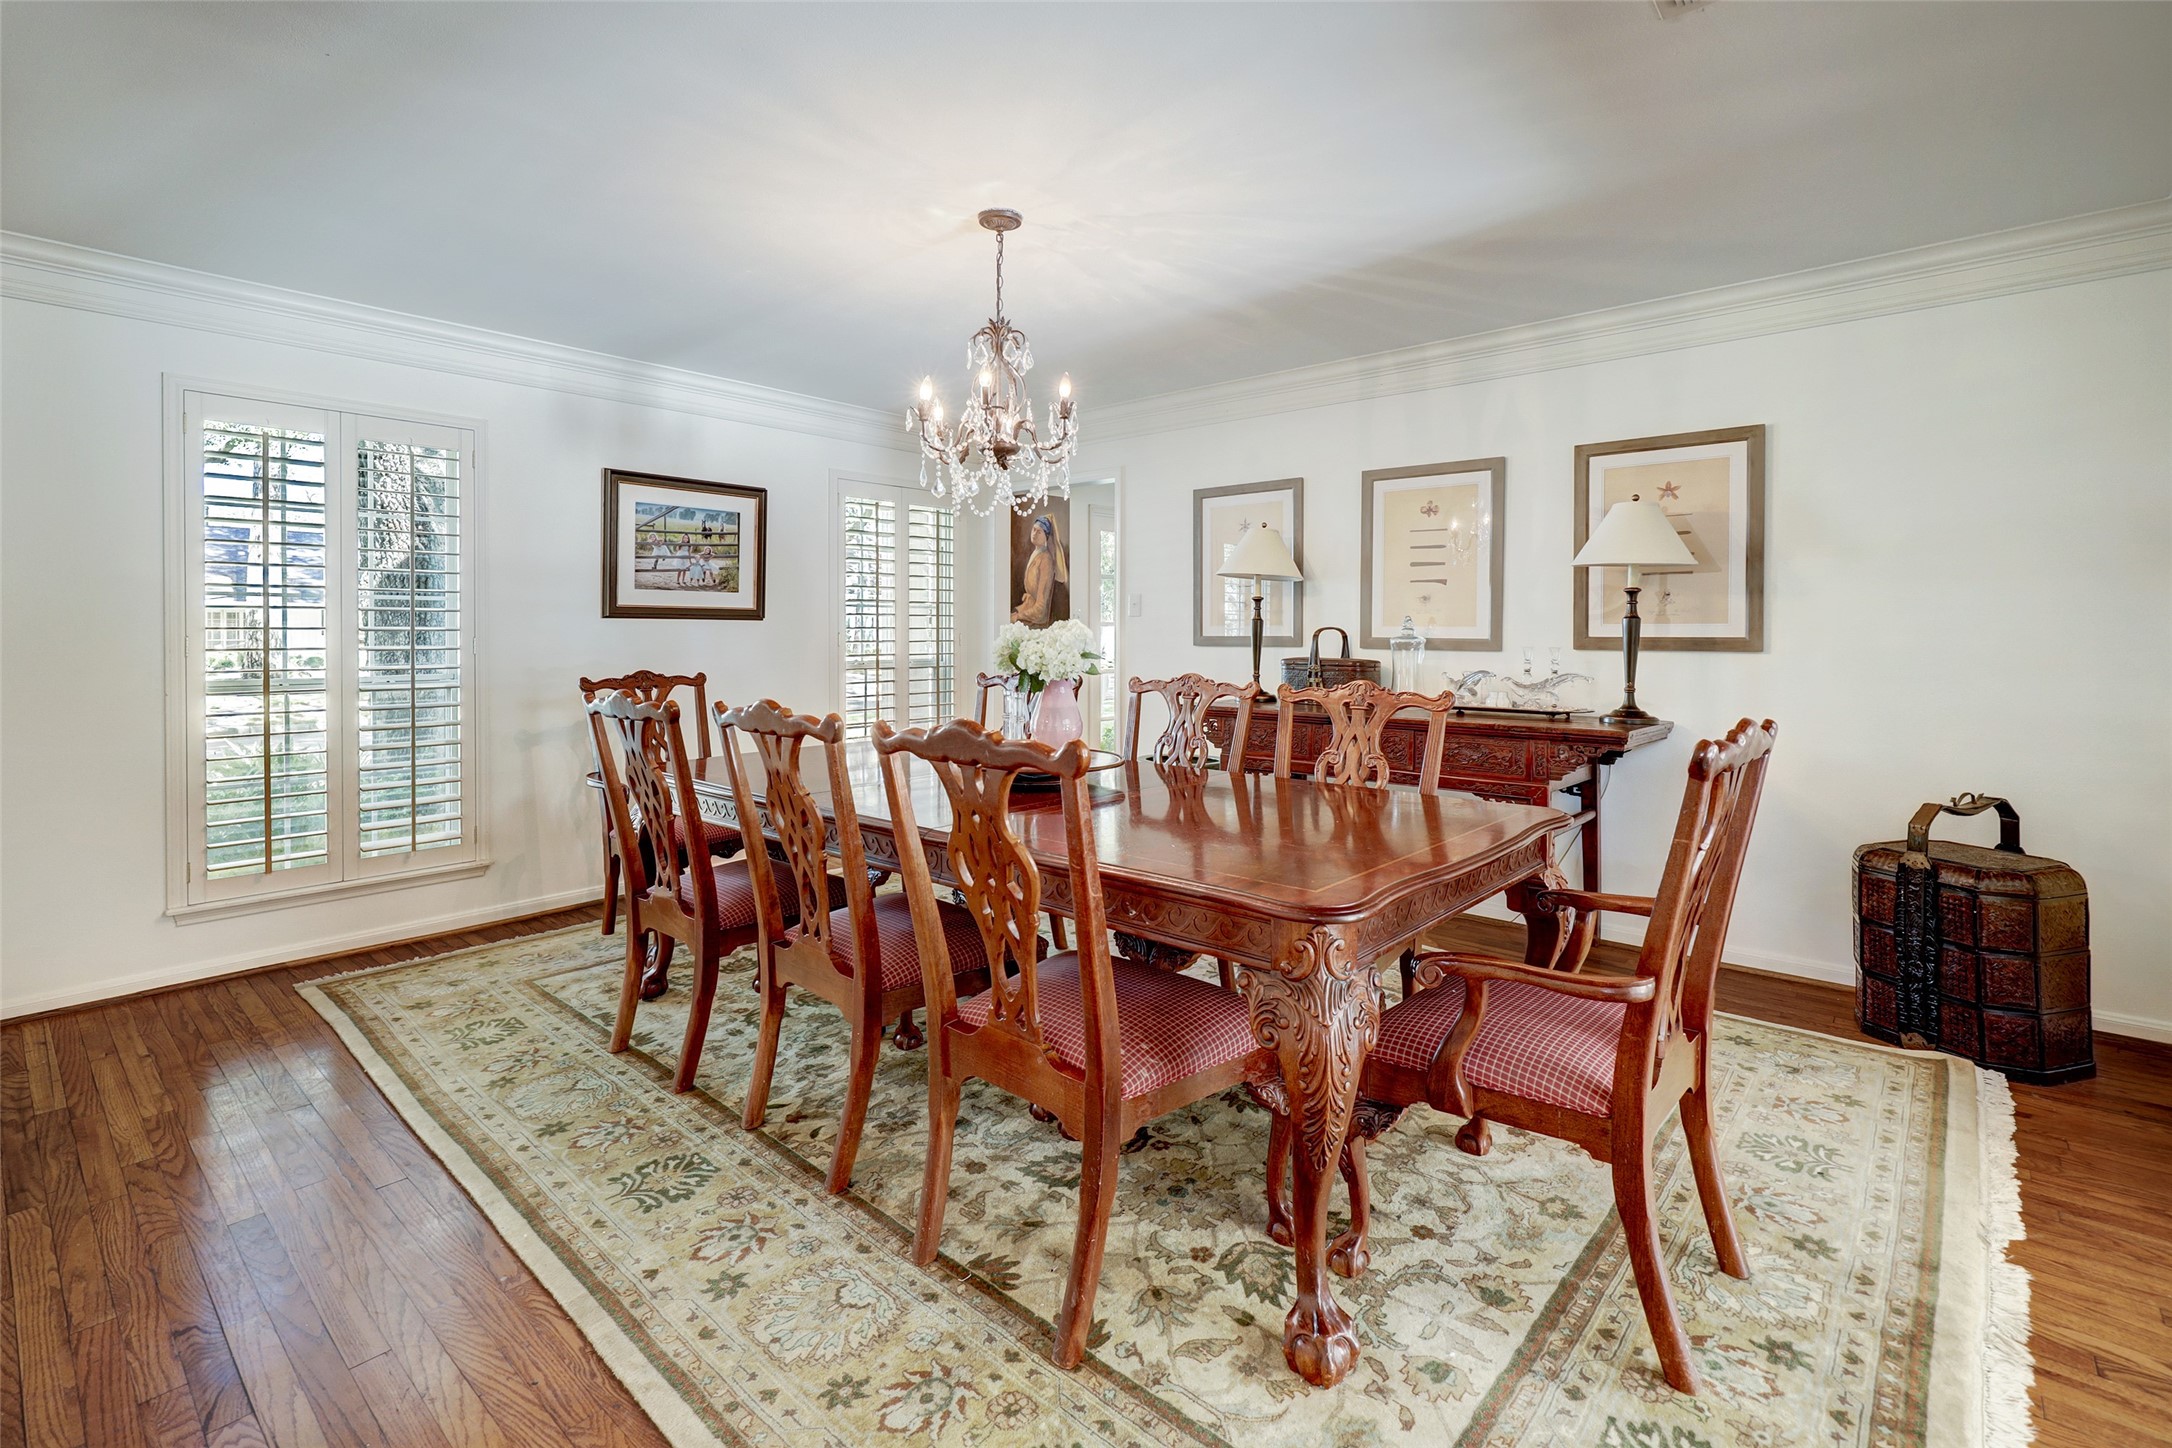 Perspective of the formal dining room overlooking the front yard.